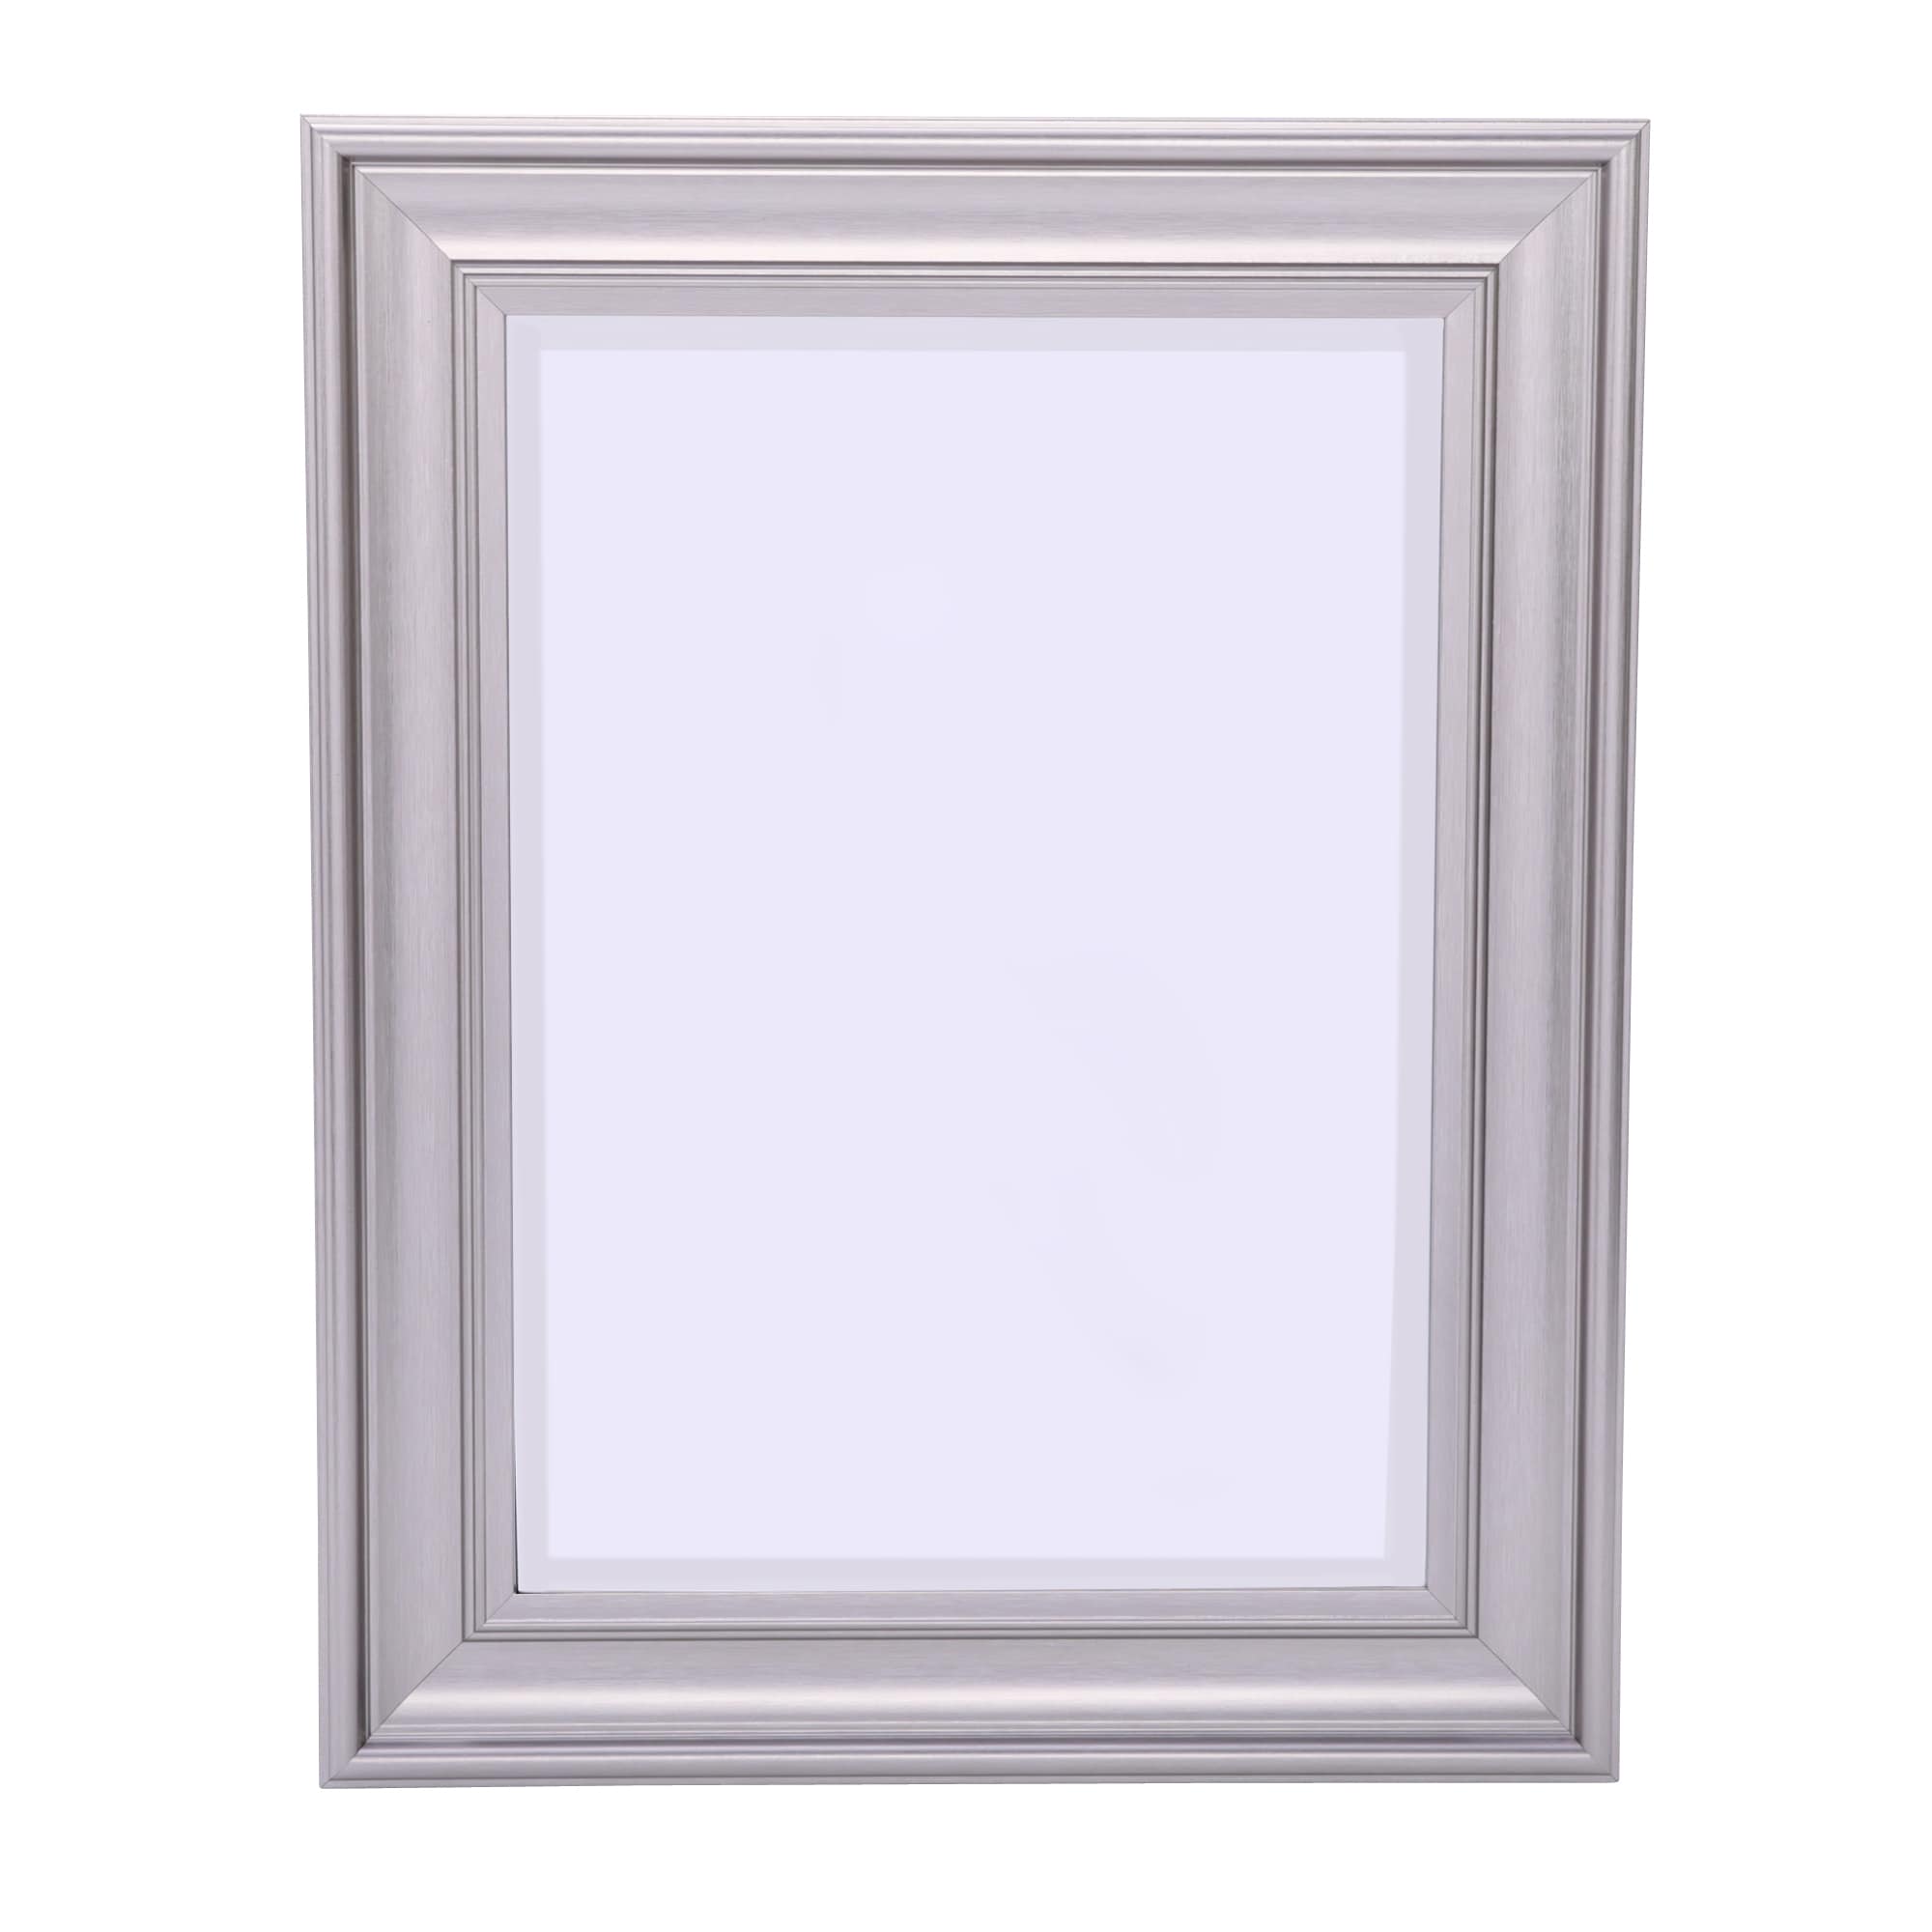 Style Selections 21.5-in W x 27.5-in H Brushed Nickel Beveled Wall ...